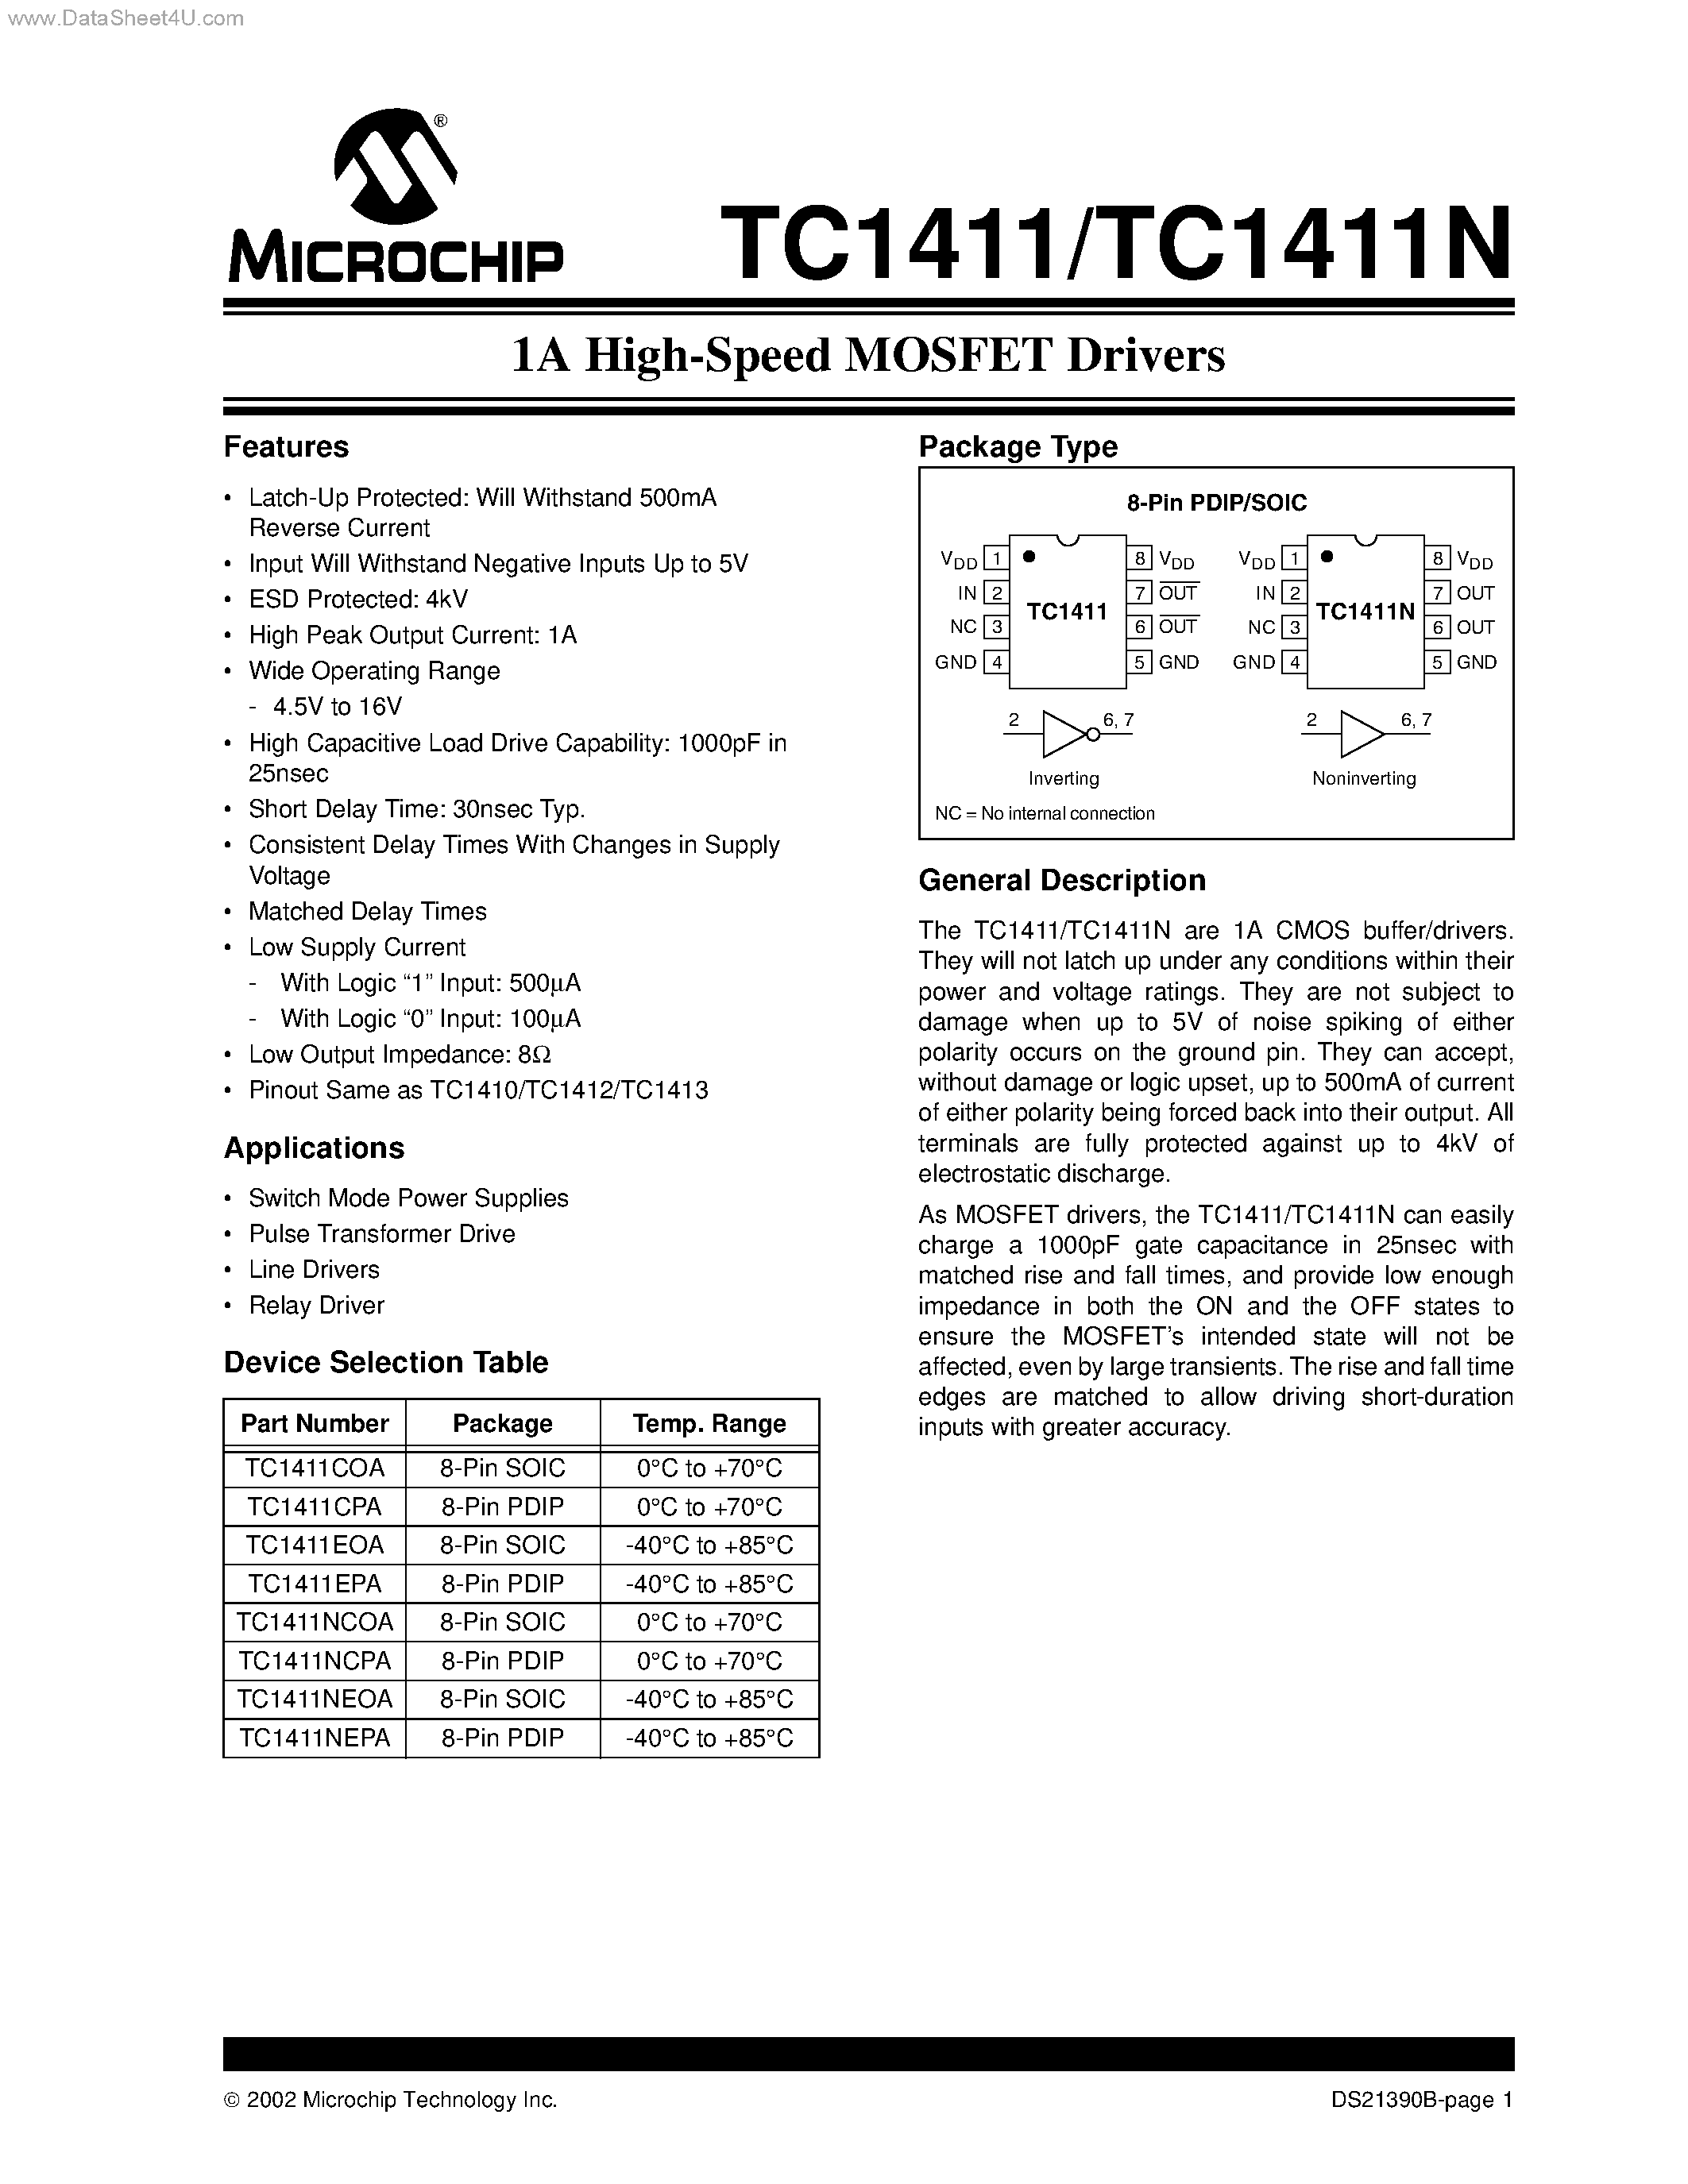 Datasheet TC1411 - High-Speed MOSFET Drivers page 1